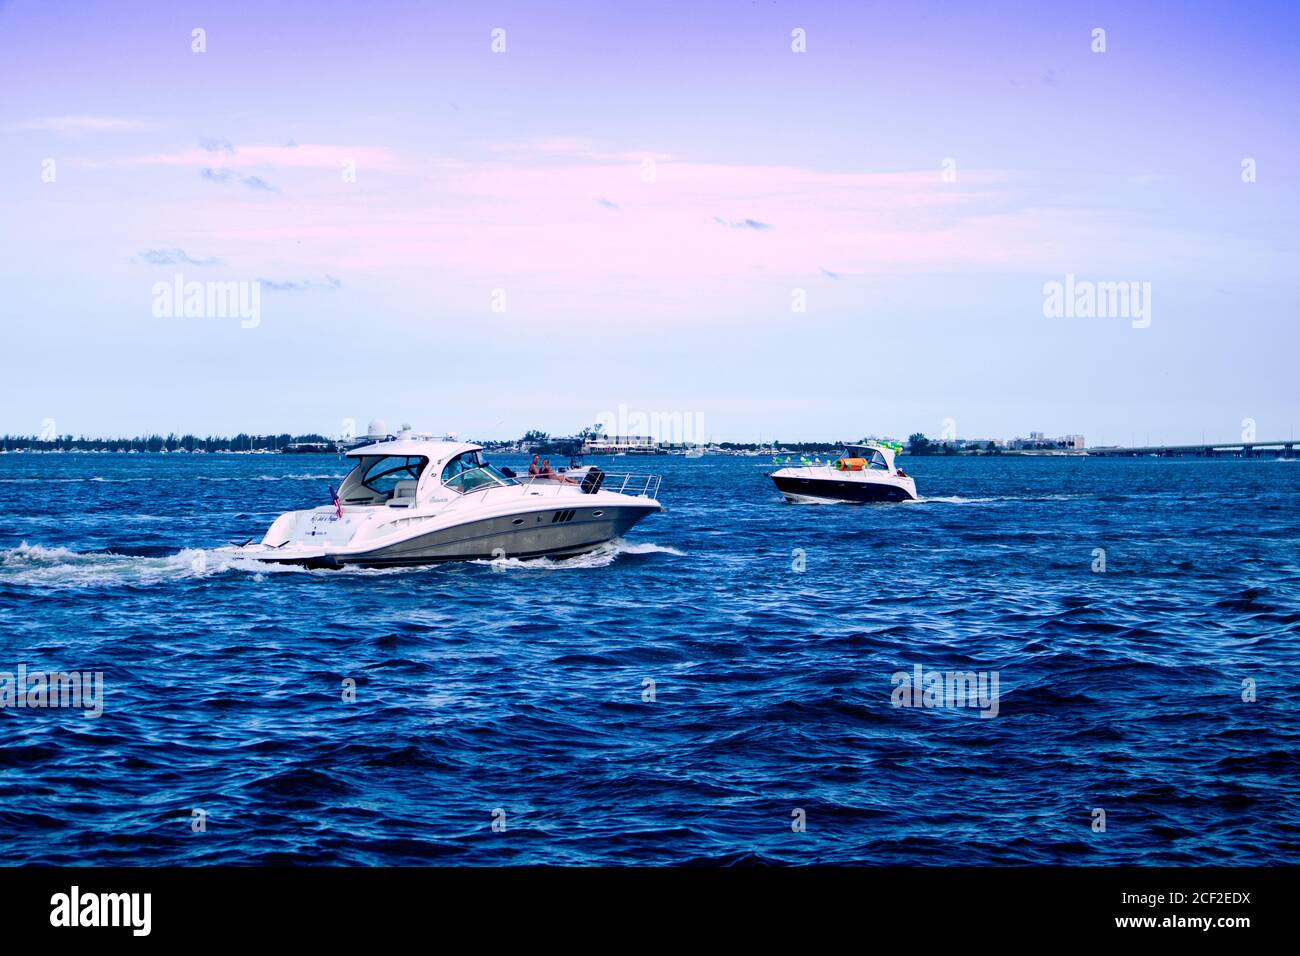 Miami, Florida/USA, 07/17/2020 - People on boats in the Miami South Channel near the coast of Brickell Key in Miami, Boats near the coast of Brickell Stock Photo